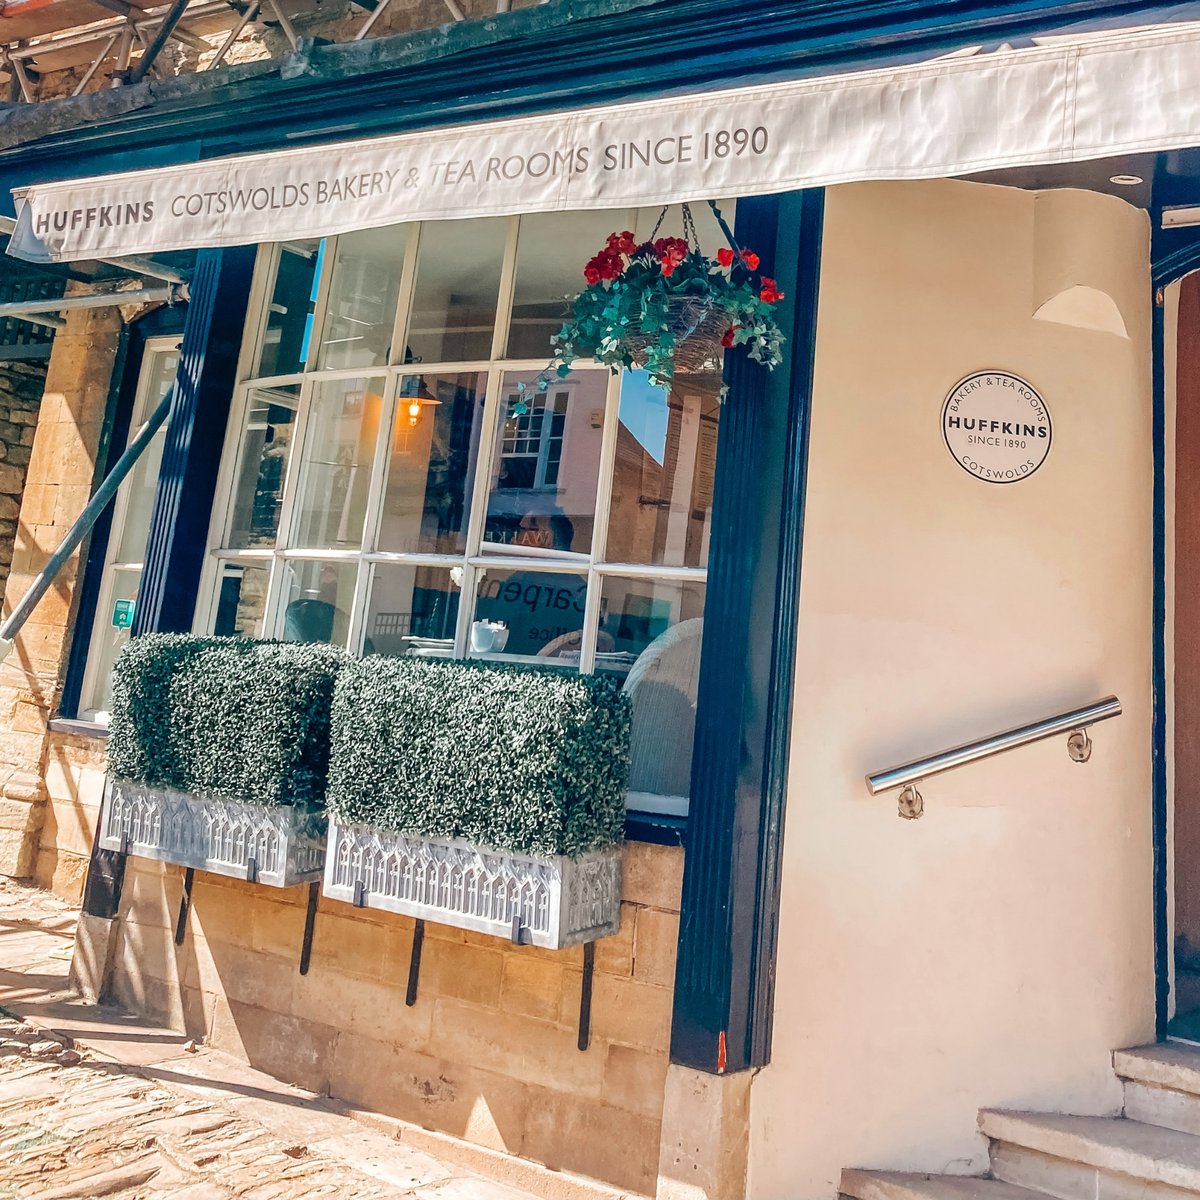 Did you know this week is #AfternoonTeaWeek? 🍰 Less than a mile from Cotswold Gate, #Burford is @Huffkins Bakery. We sent @theoxonfoodie to review their afternoon tea experience. Why not stop by after a visit to Cotswold Gate? Read her review: buff.ly/3OM1i19